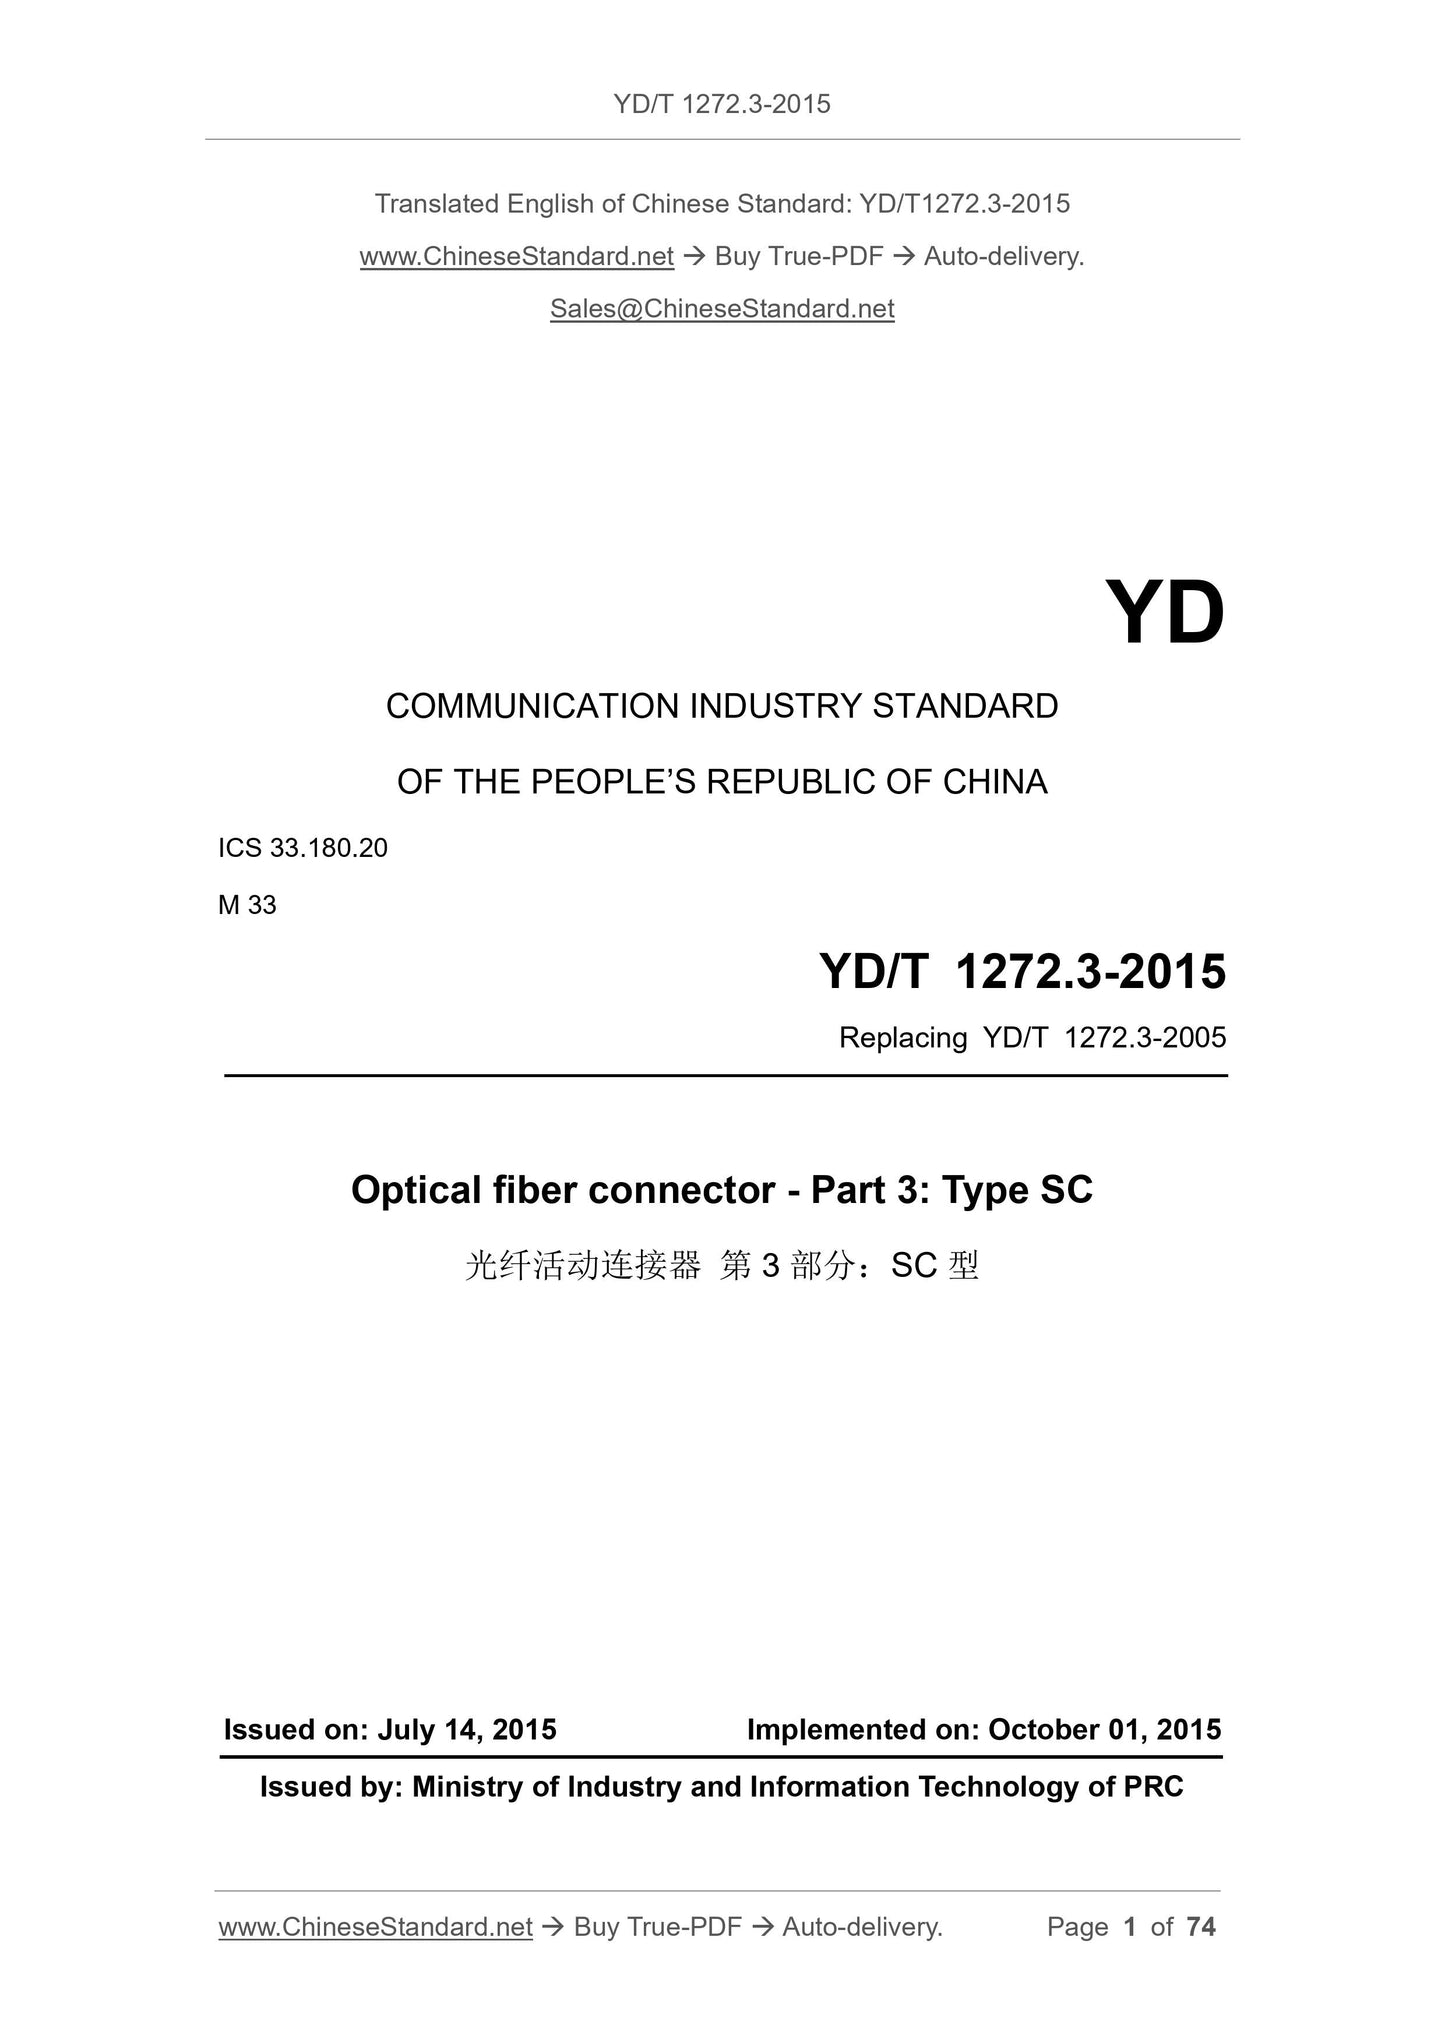 YD/T 1272.3-2015 Page 1